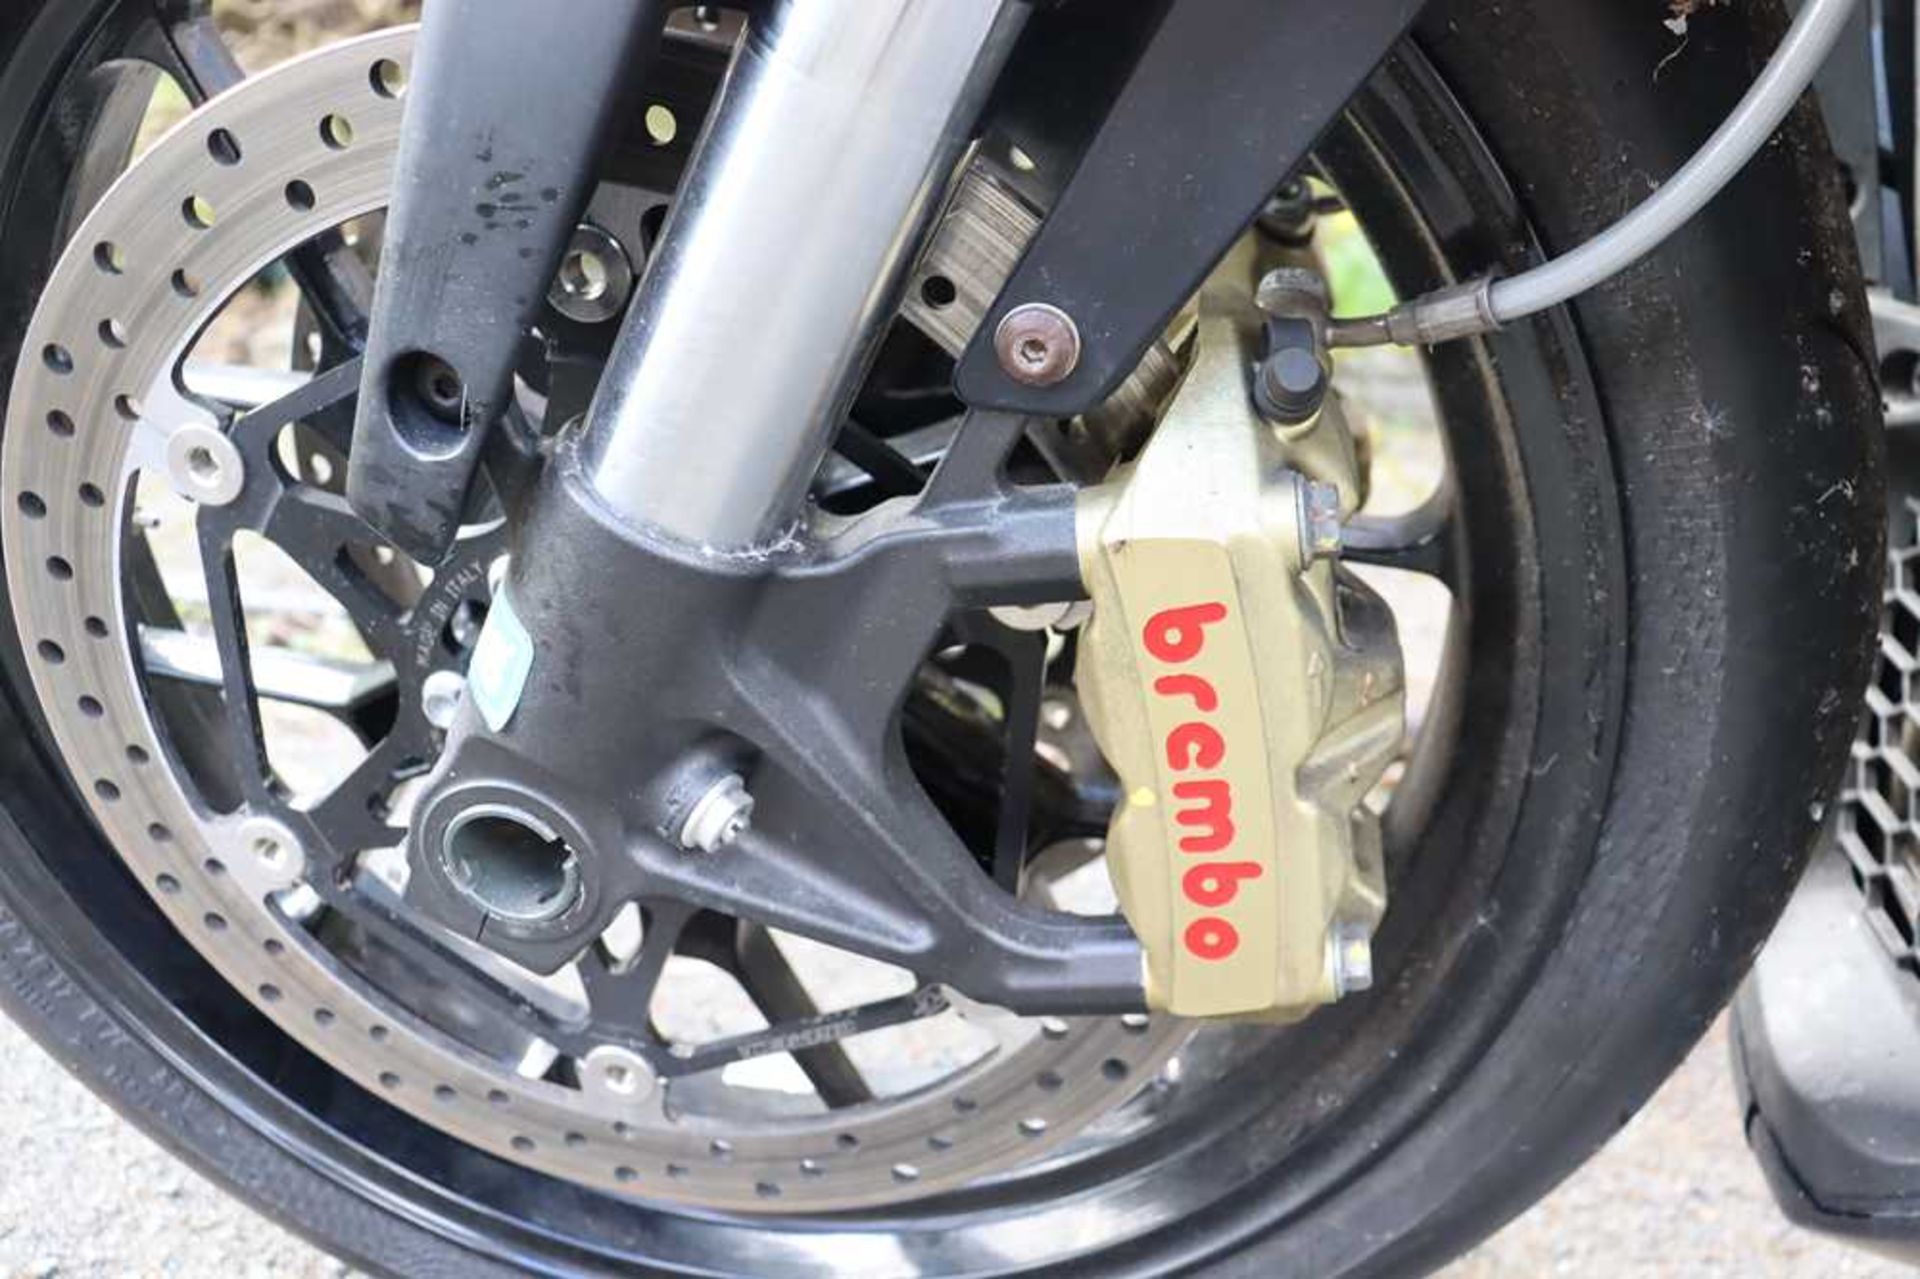 2010 Aprilia RSV4R Fitted with Moto GP style exhaust, original included - Image 26 of 44